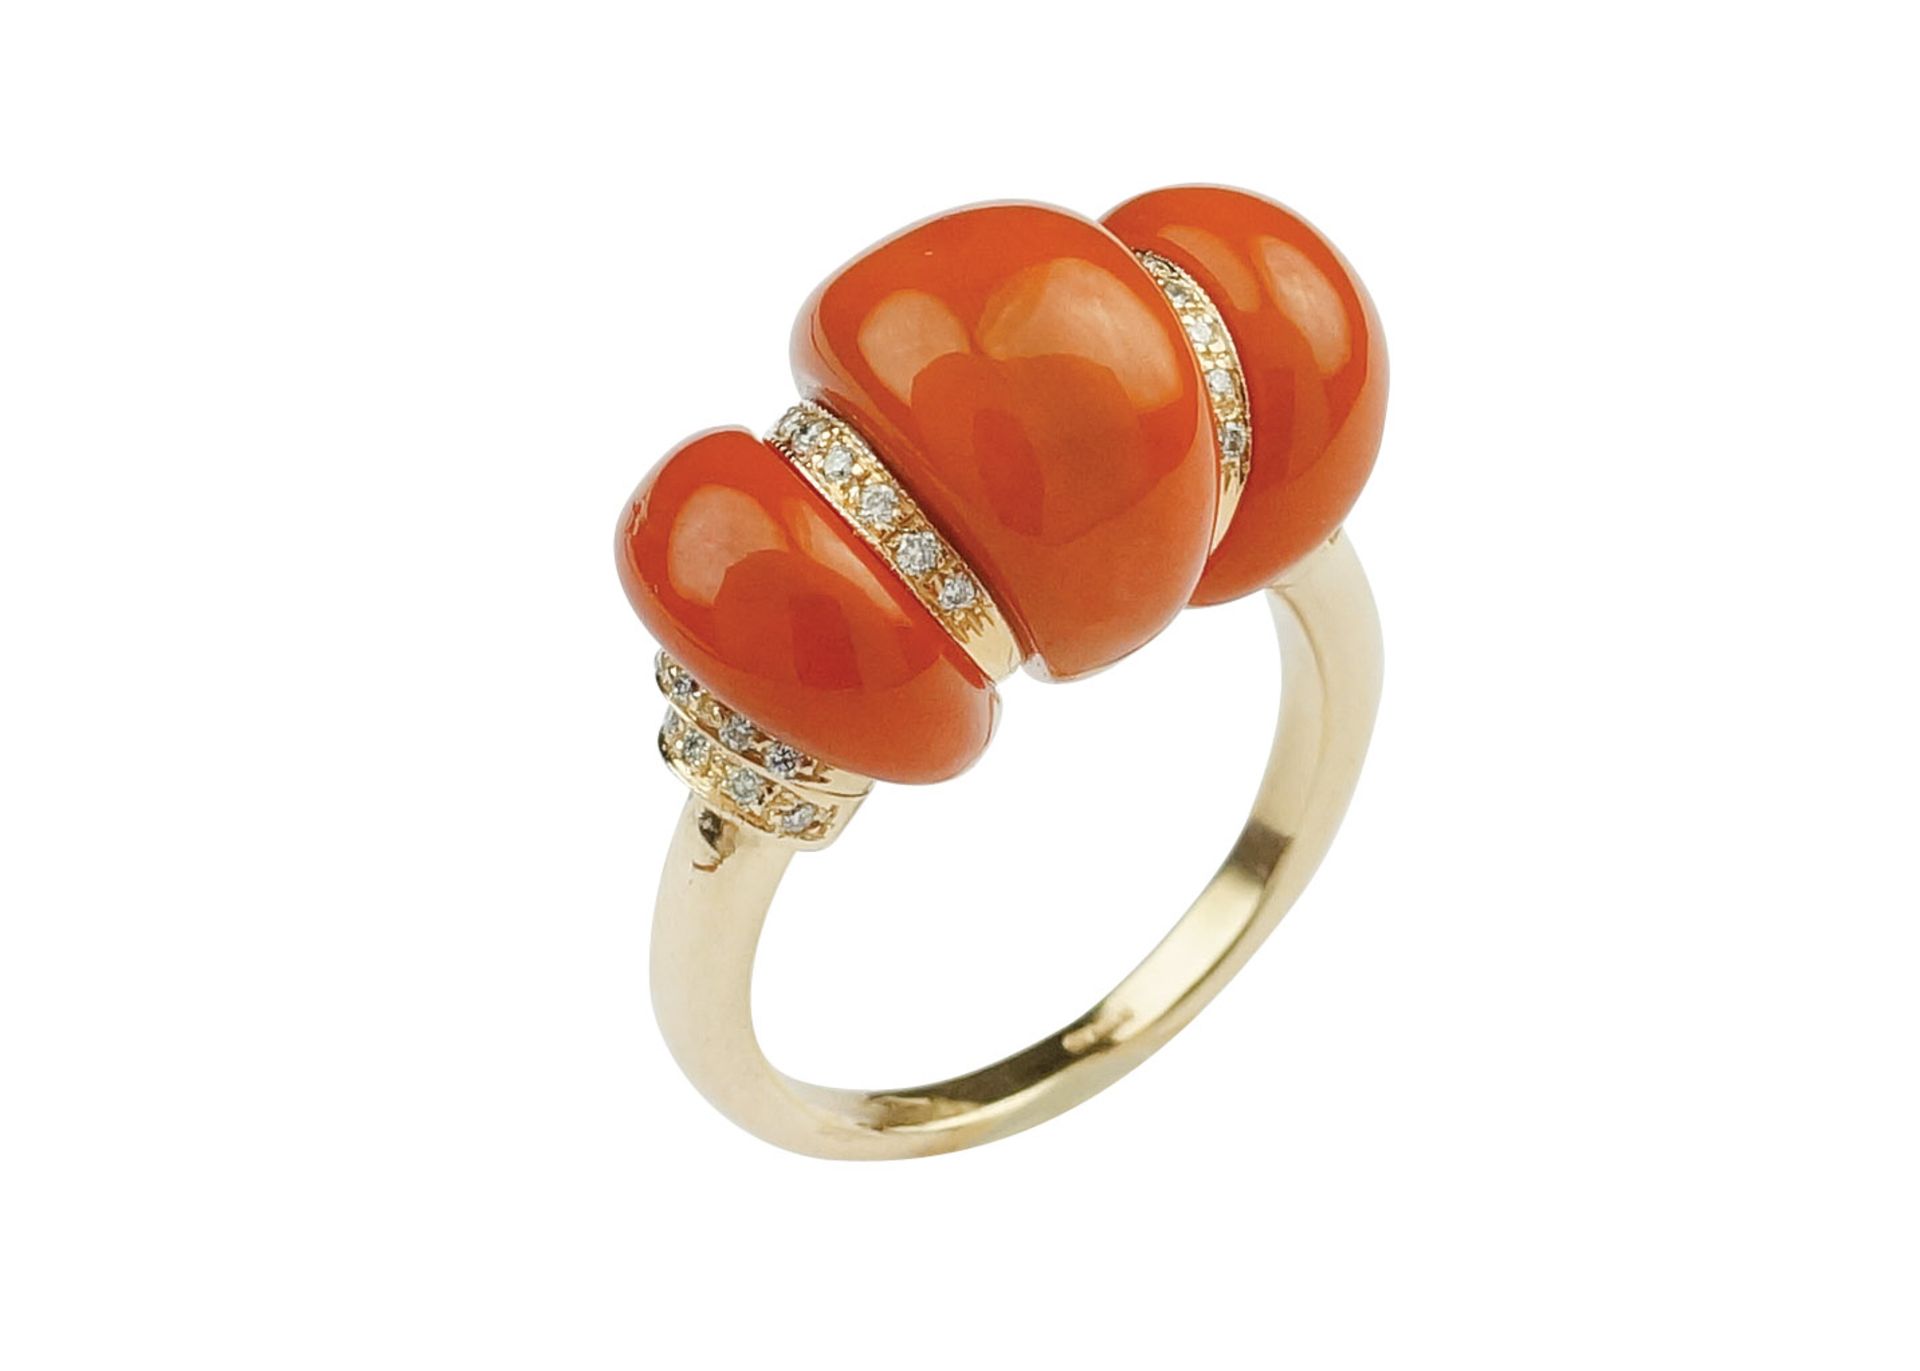 A 14k rose gold, diamond and Mediterranean coral ring